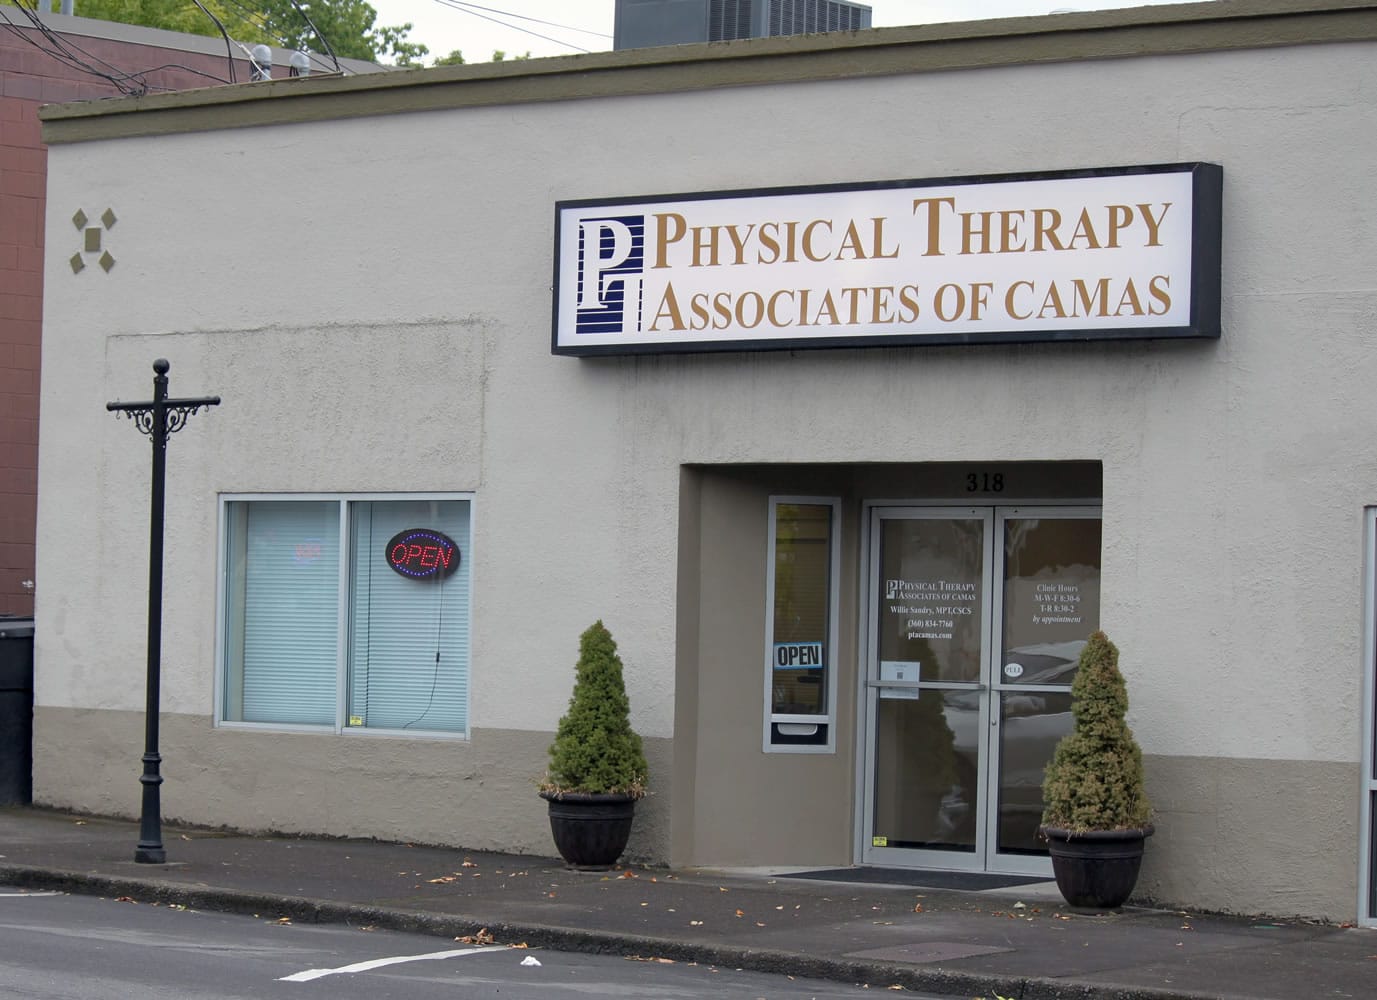 Physical Therapy Associates recently moved to its new location at 318 N.E. Fifth Ave., in Camas. A celebration is set for Friday, Oct.